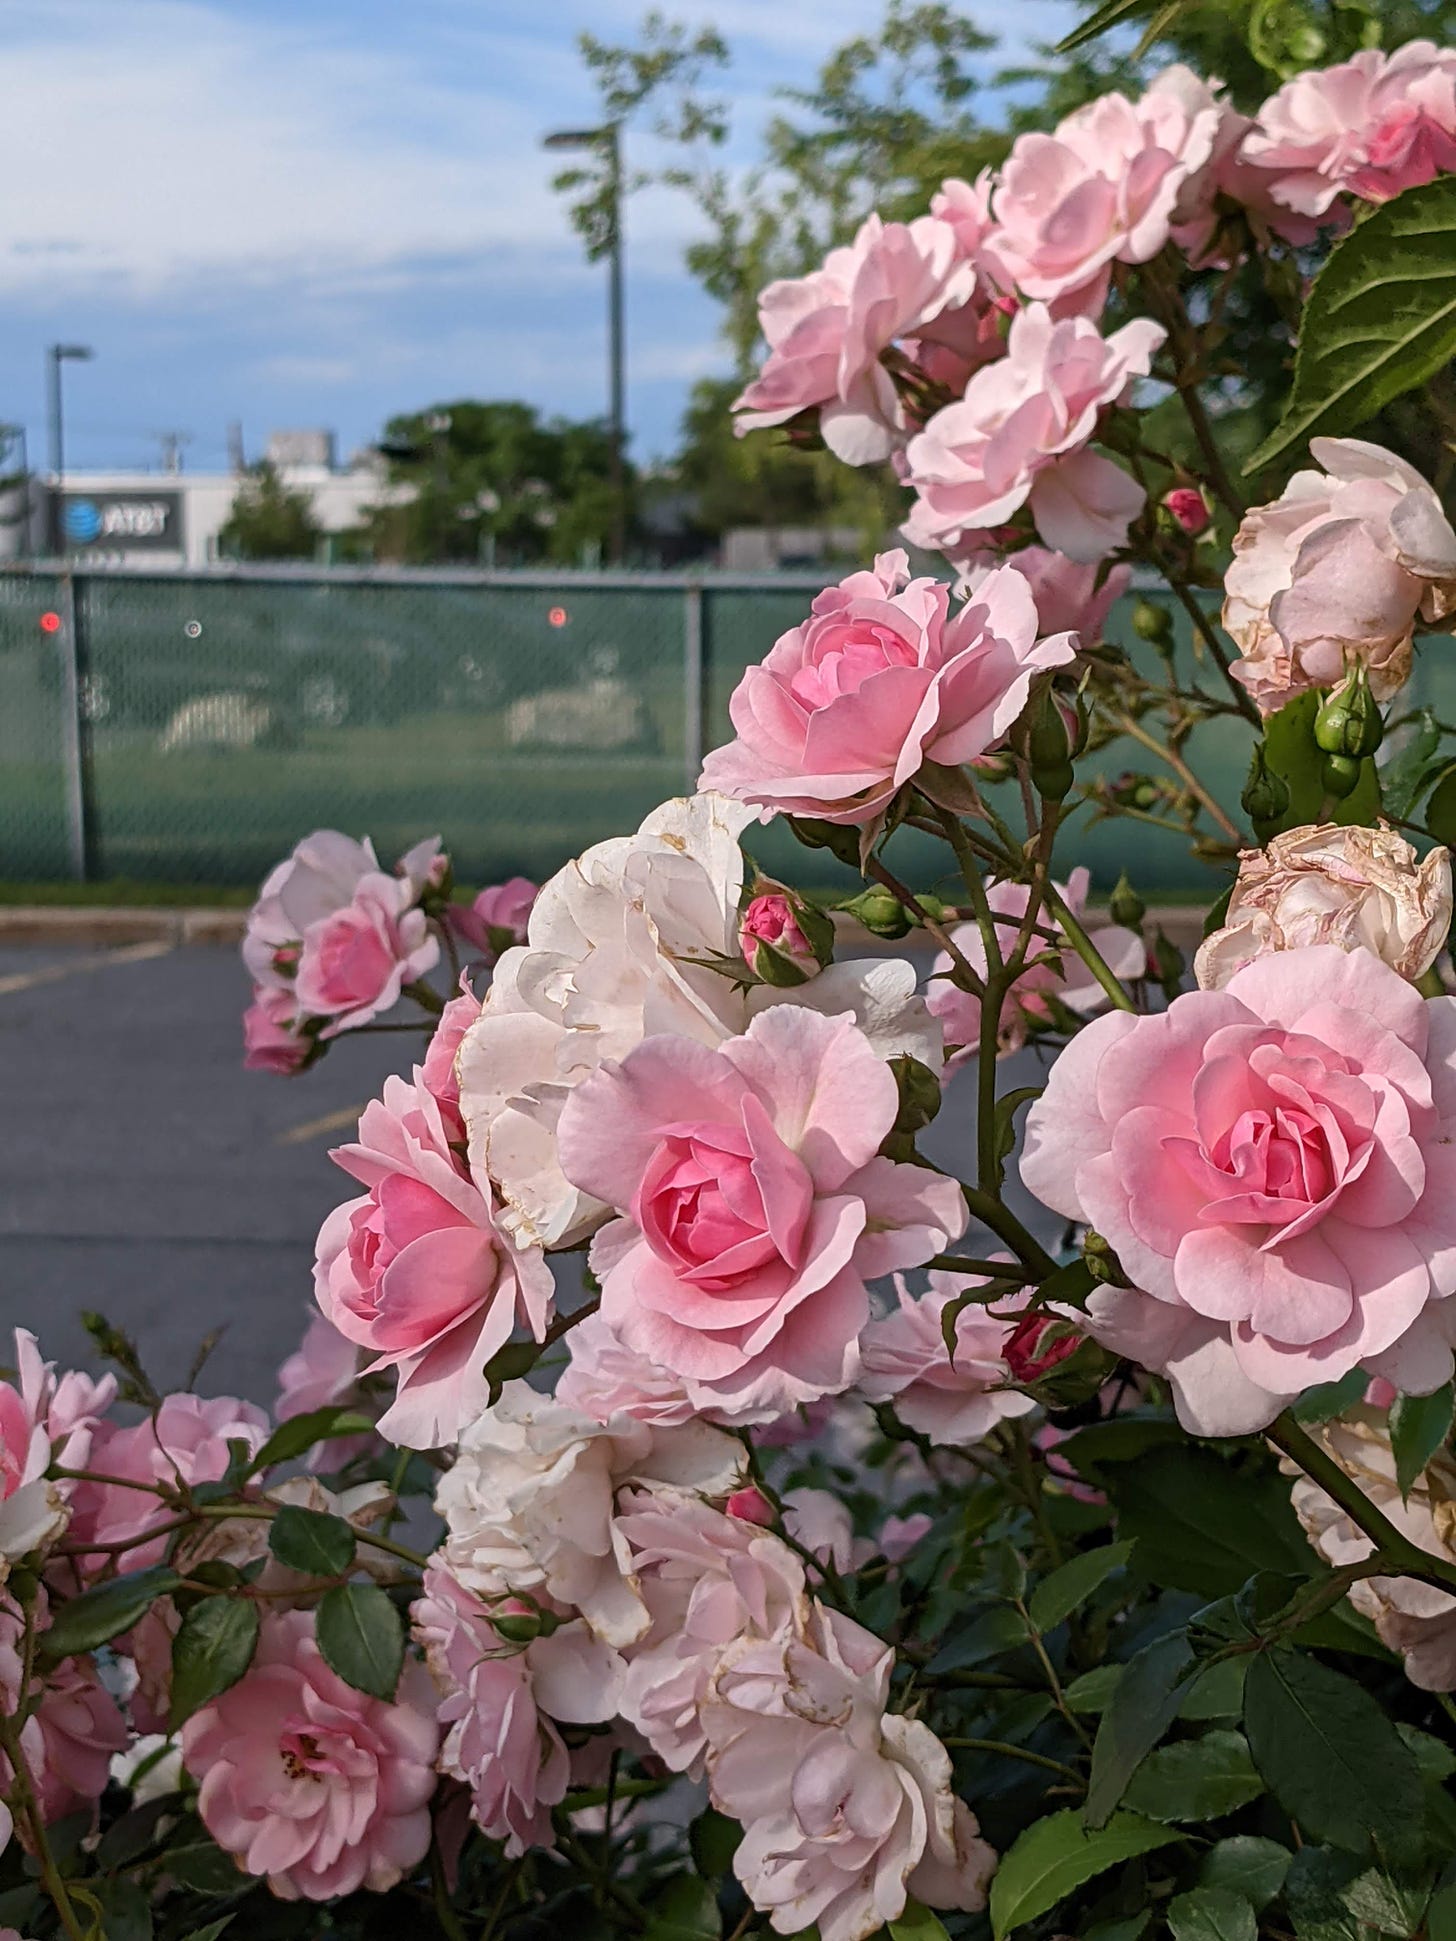 Many small, pink roses on a bush in a parking lot in Portland, Maine (US). Location not clear from visual.